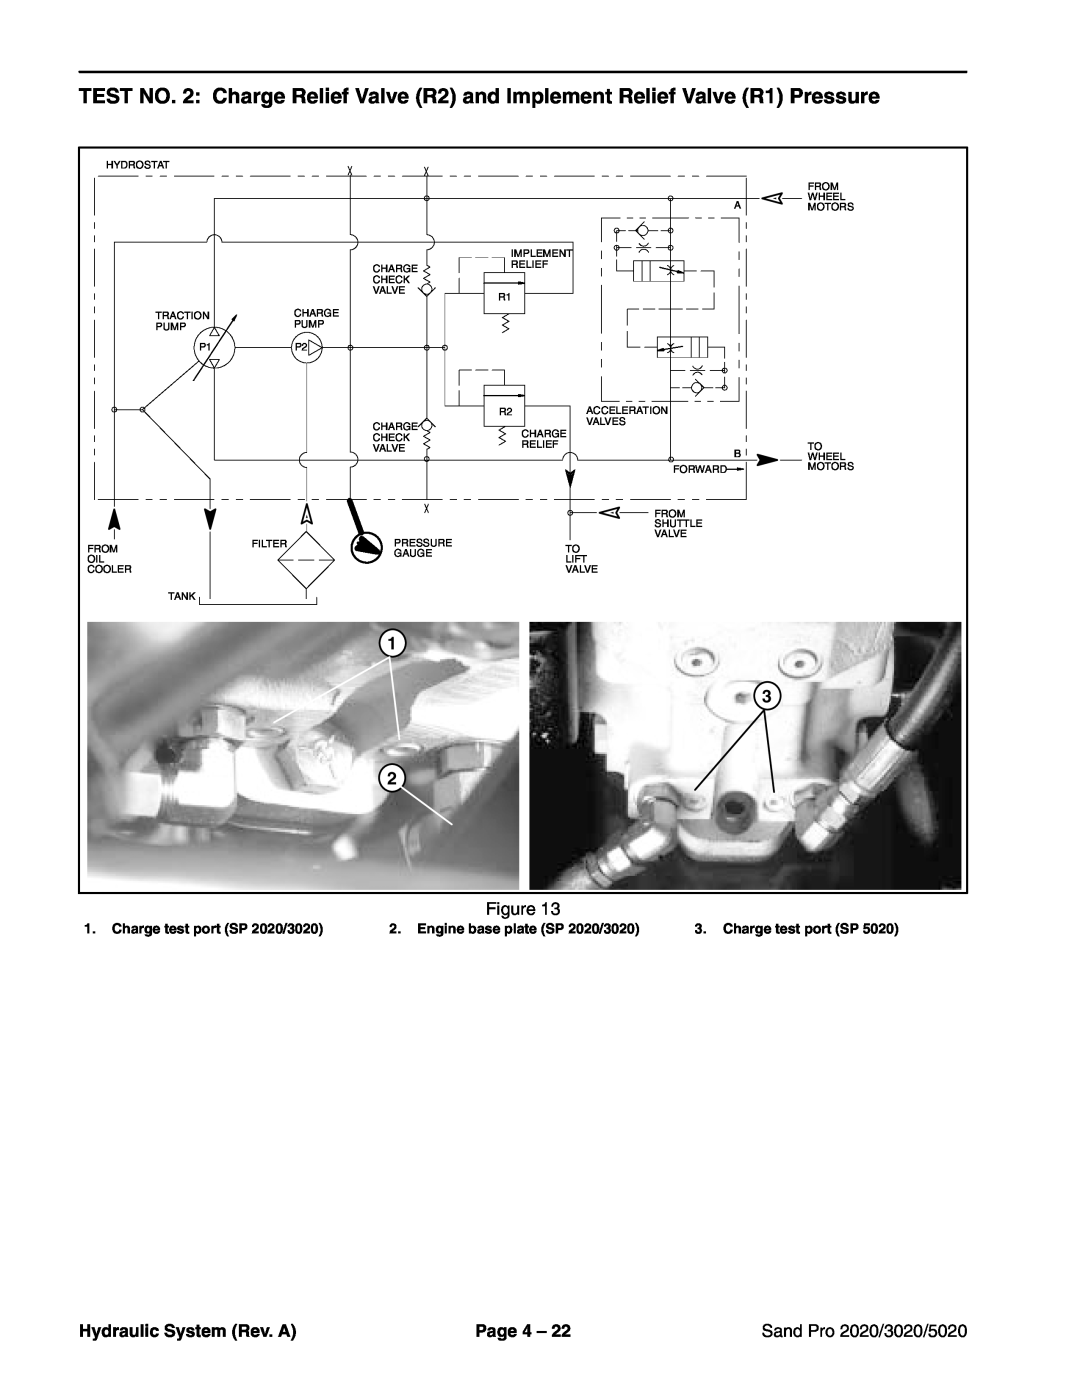 Toro service manual Hydraulic System Rev. A, Page 4, Sand Pro 2020/3020/5020, Charge test port SP 2020/3020 